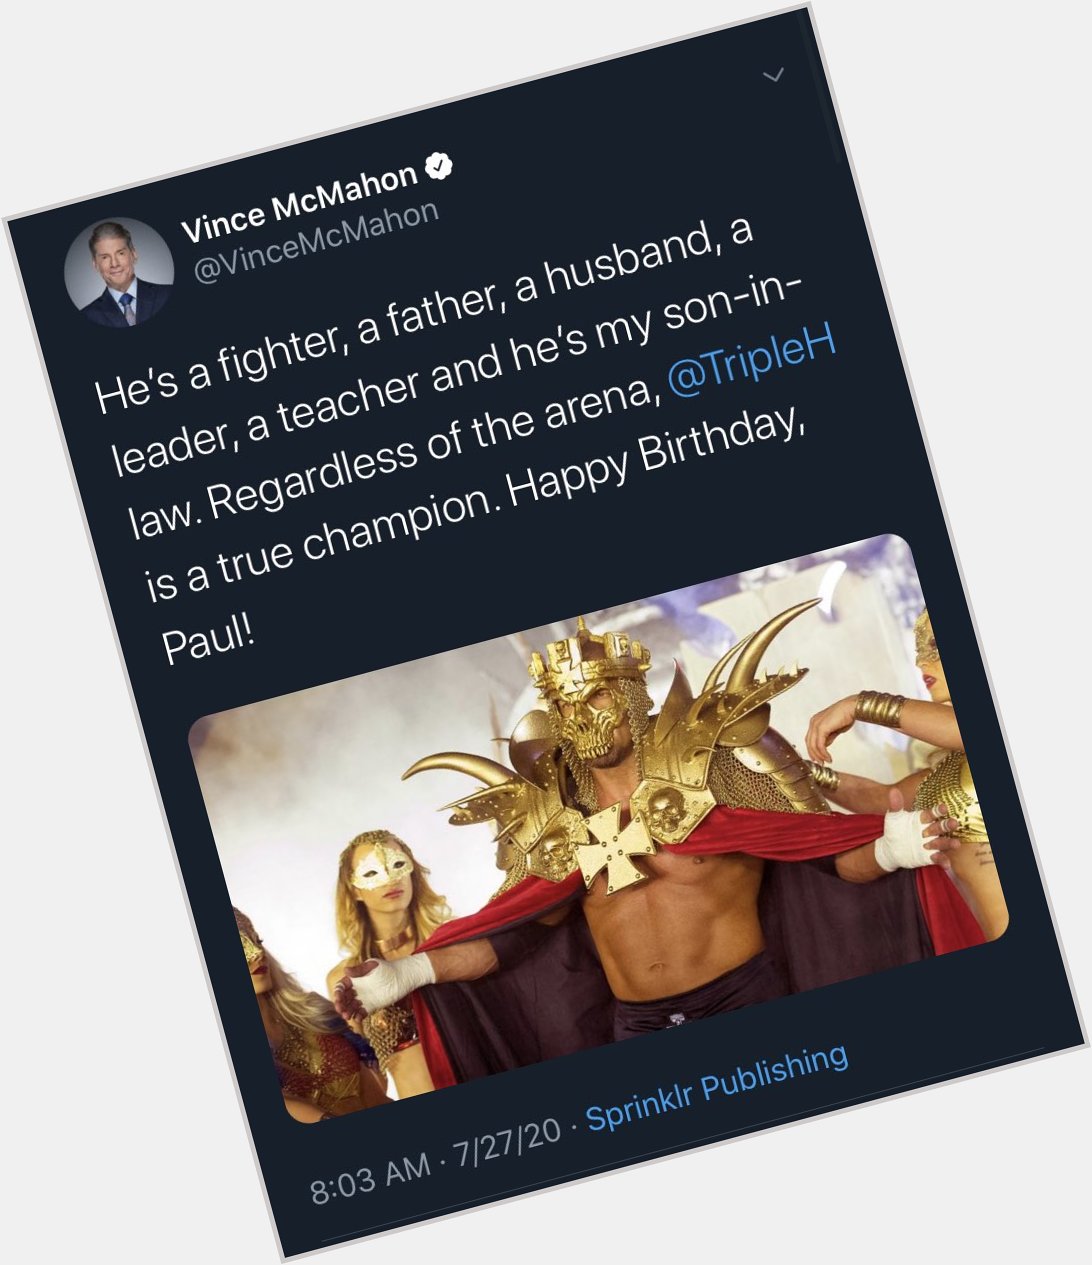 How Vince McMahon wishes his son a happy birthday vs How Vince McMahon wishes Shane McMahon a happy birthday... 